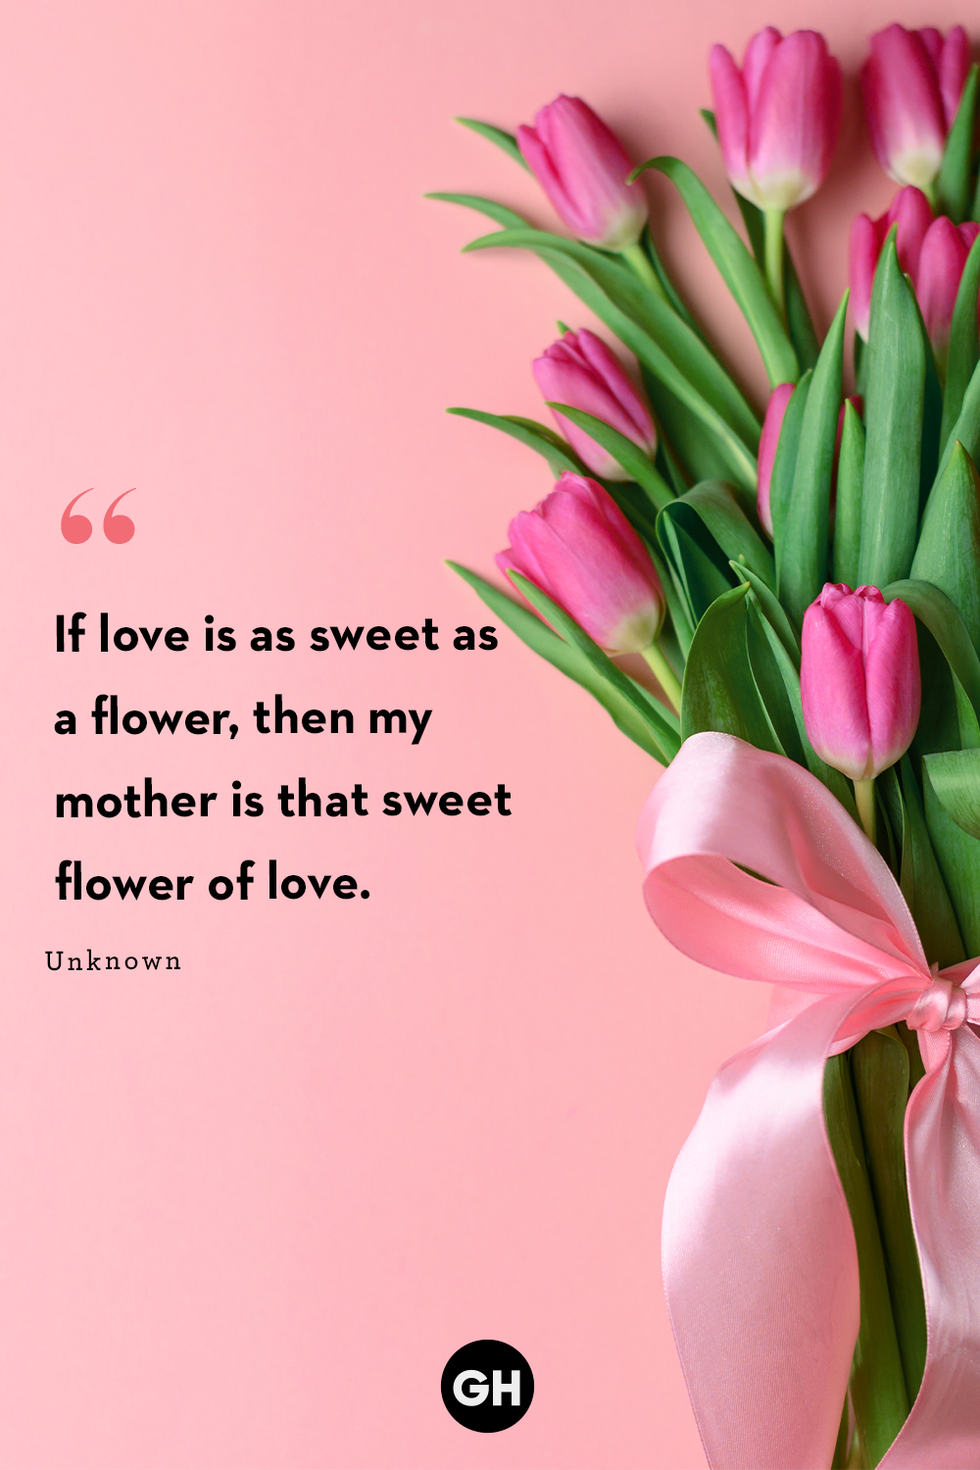 mother's day instagram captions love as sweet as a flower quote